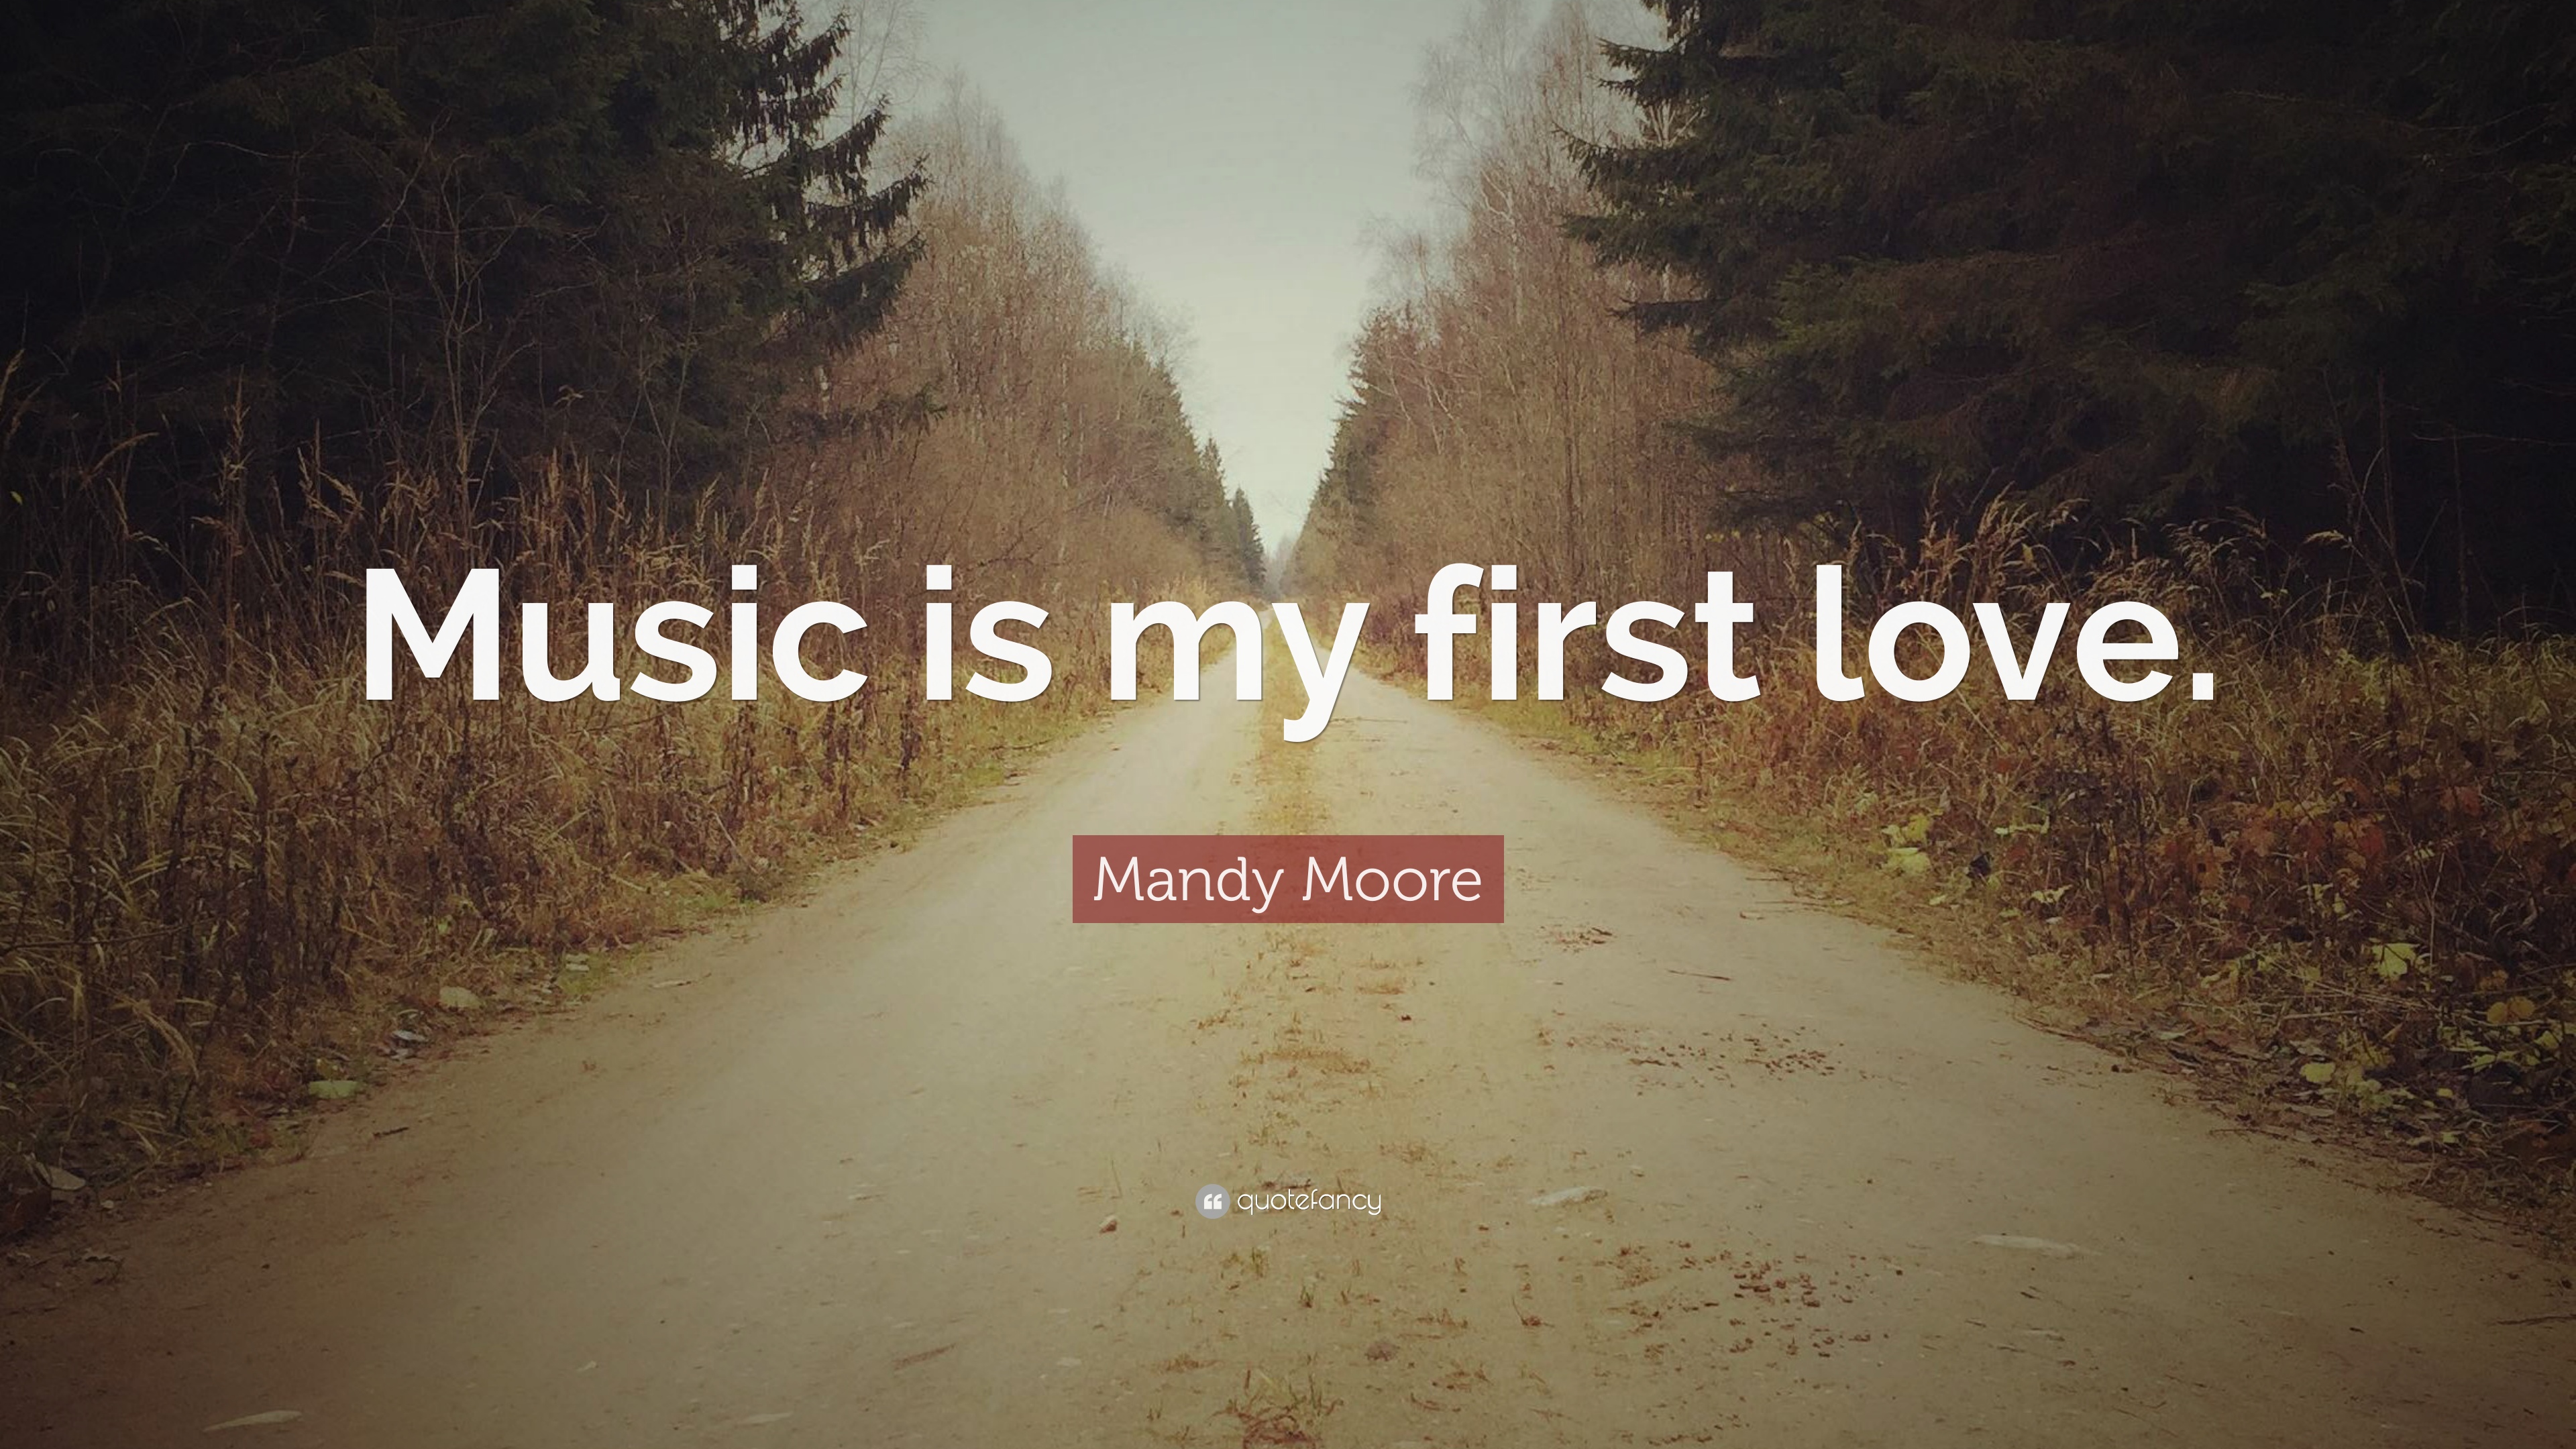 Mandy Moore Quote: “Music is my first love.” 9 wallpaper